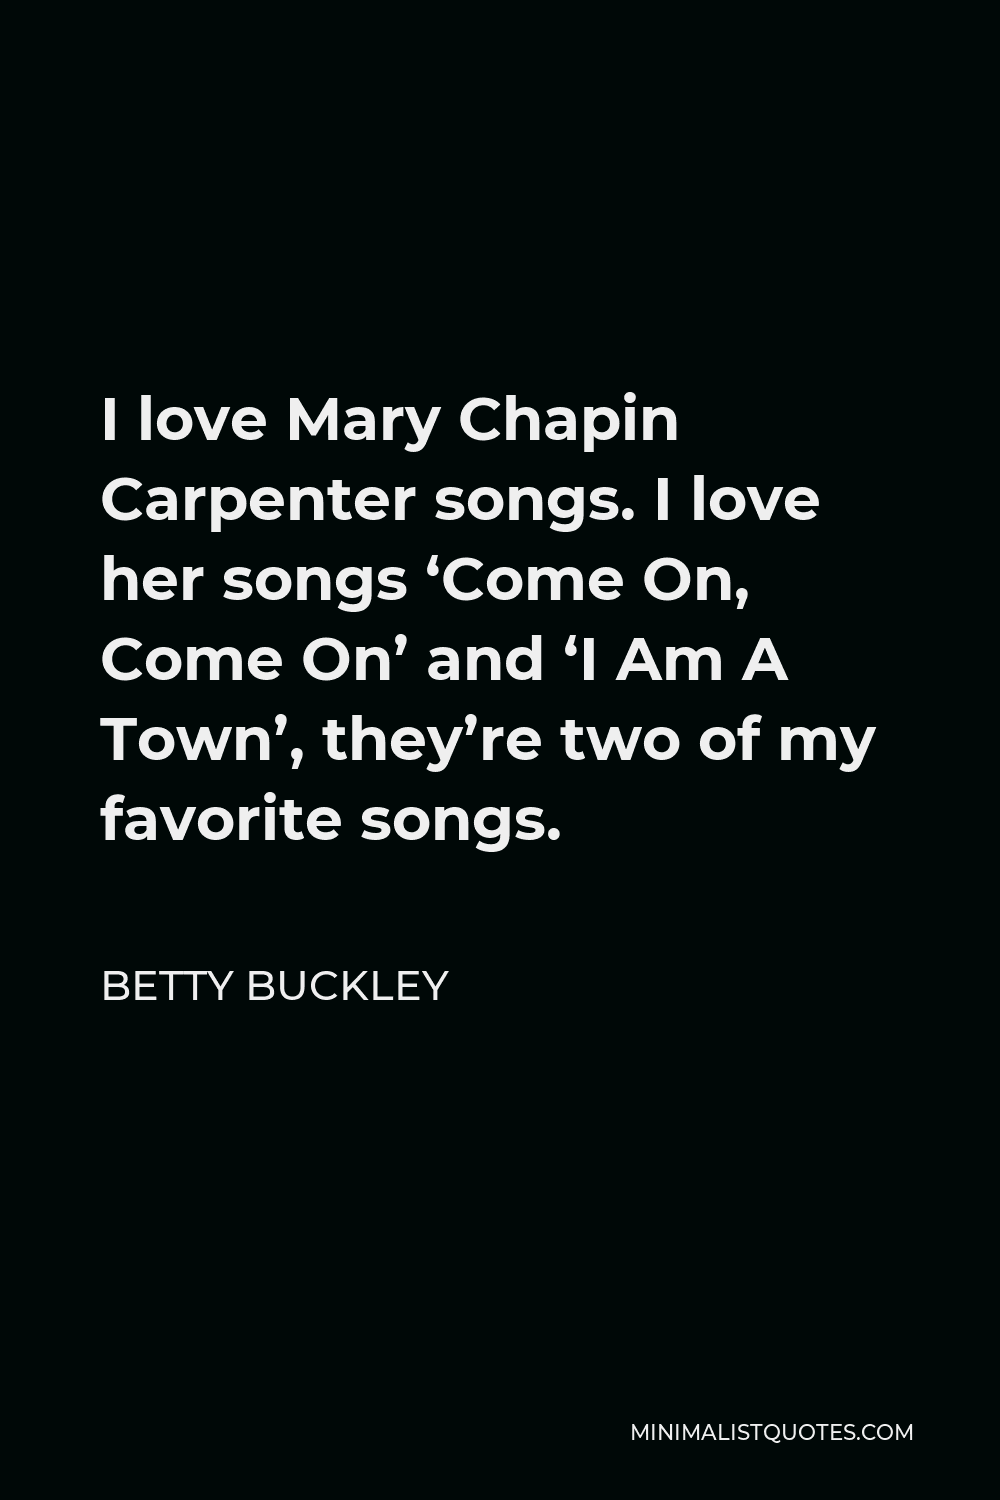 Betty Buckley Quote - I love Mary Chapin Carpenter songs. I love her songs ‘Come On, Come On’ and ‘I Am A Town’, they’re two of my favorite songs.